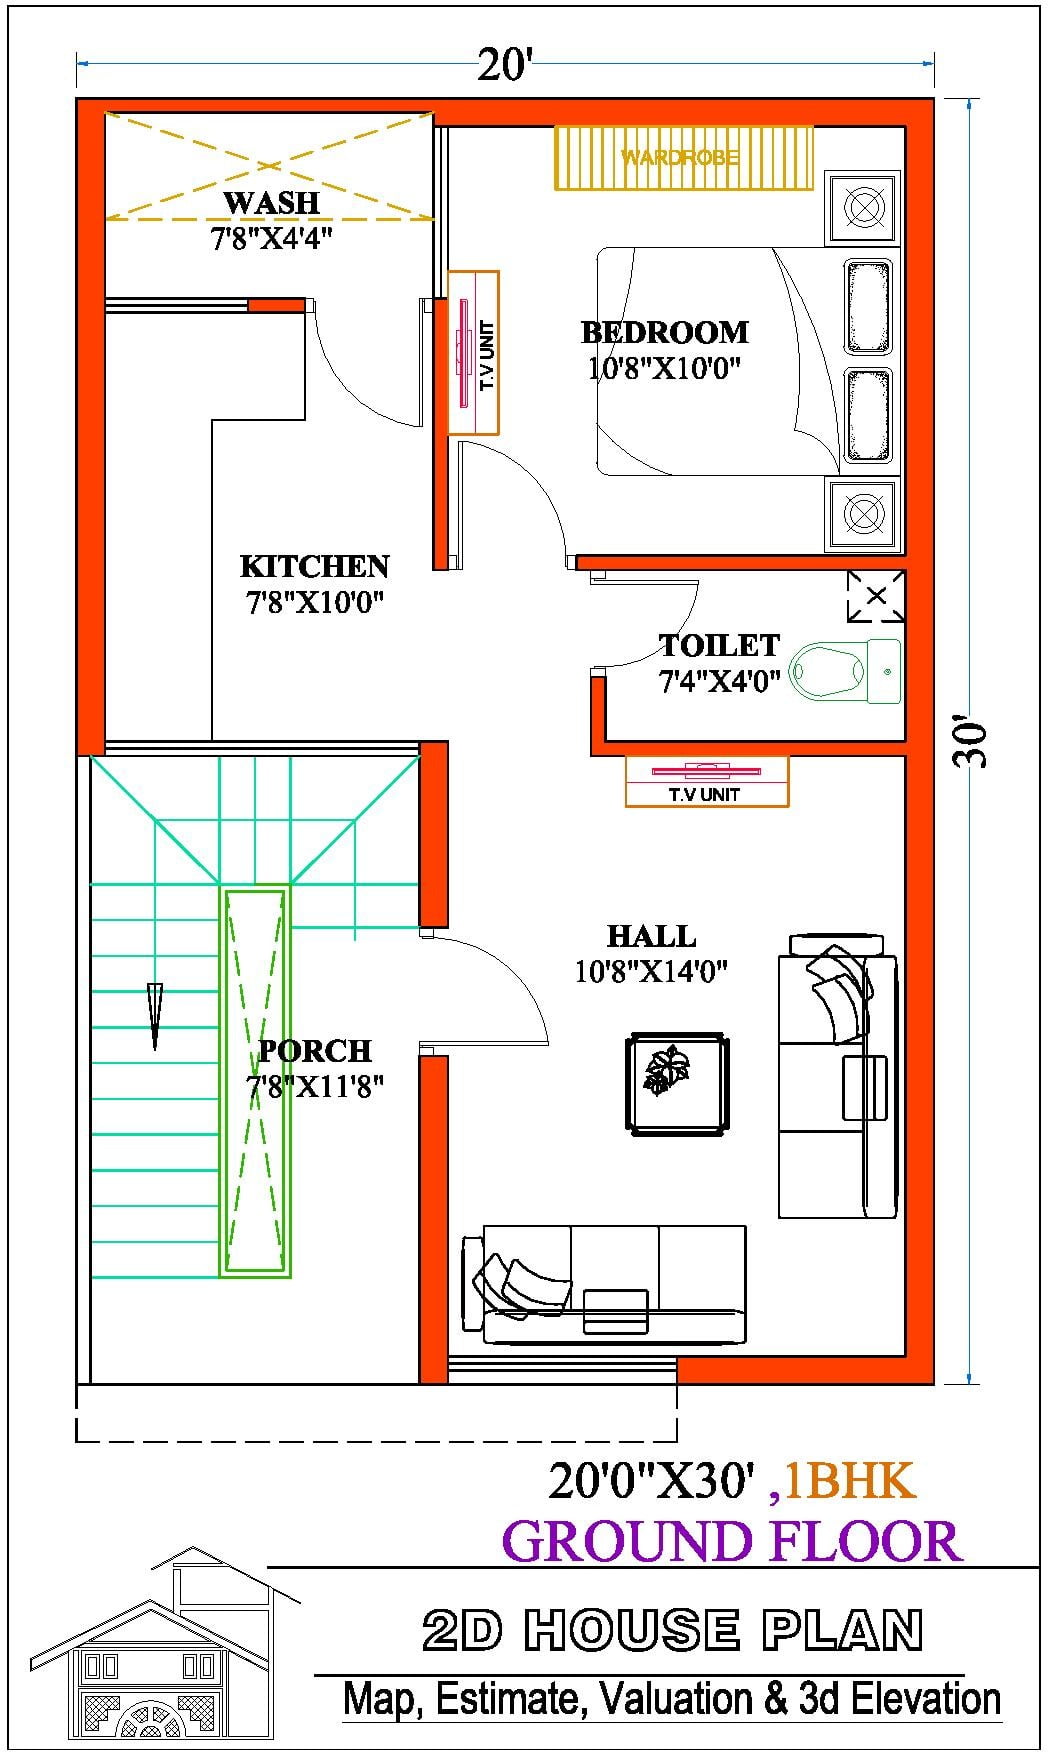 20 by 30 Indian house plans | best 1bhk & 2bhk house plans